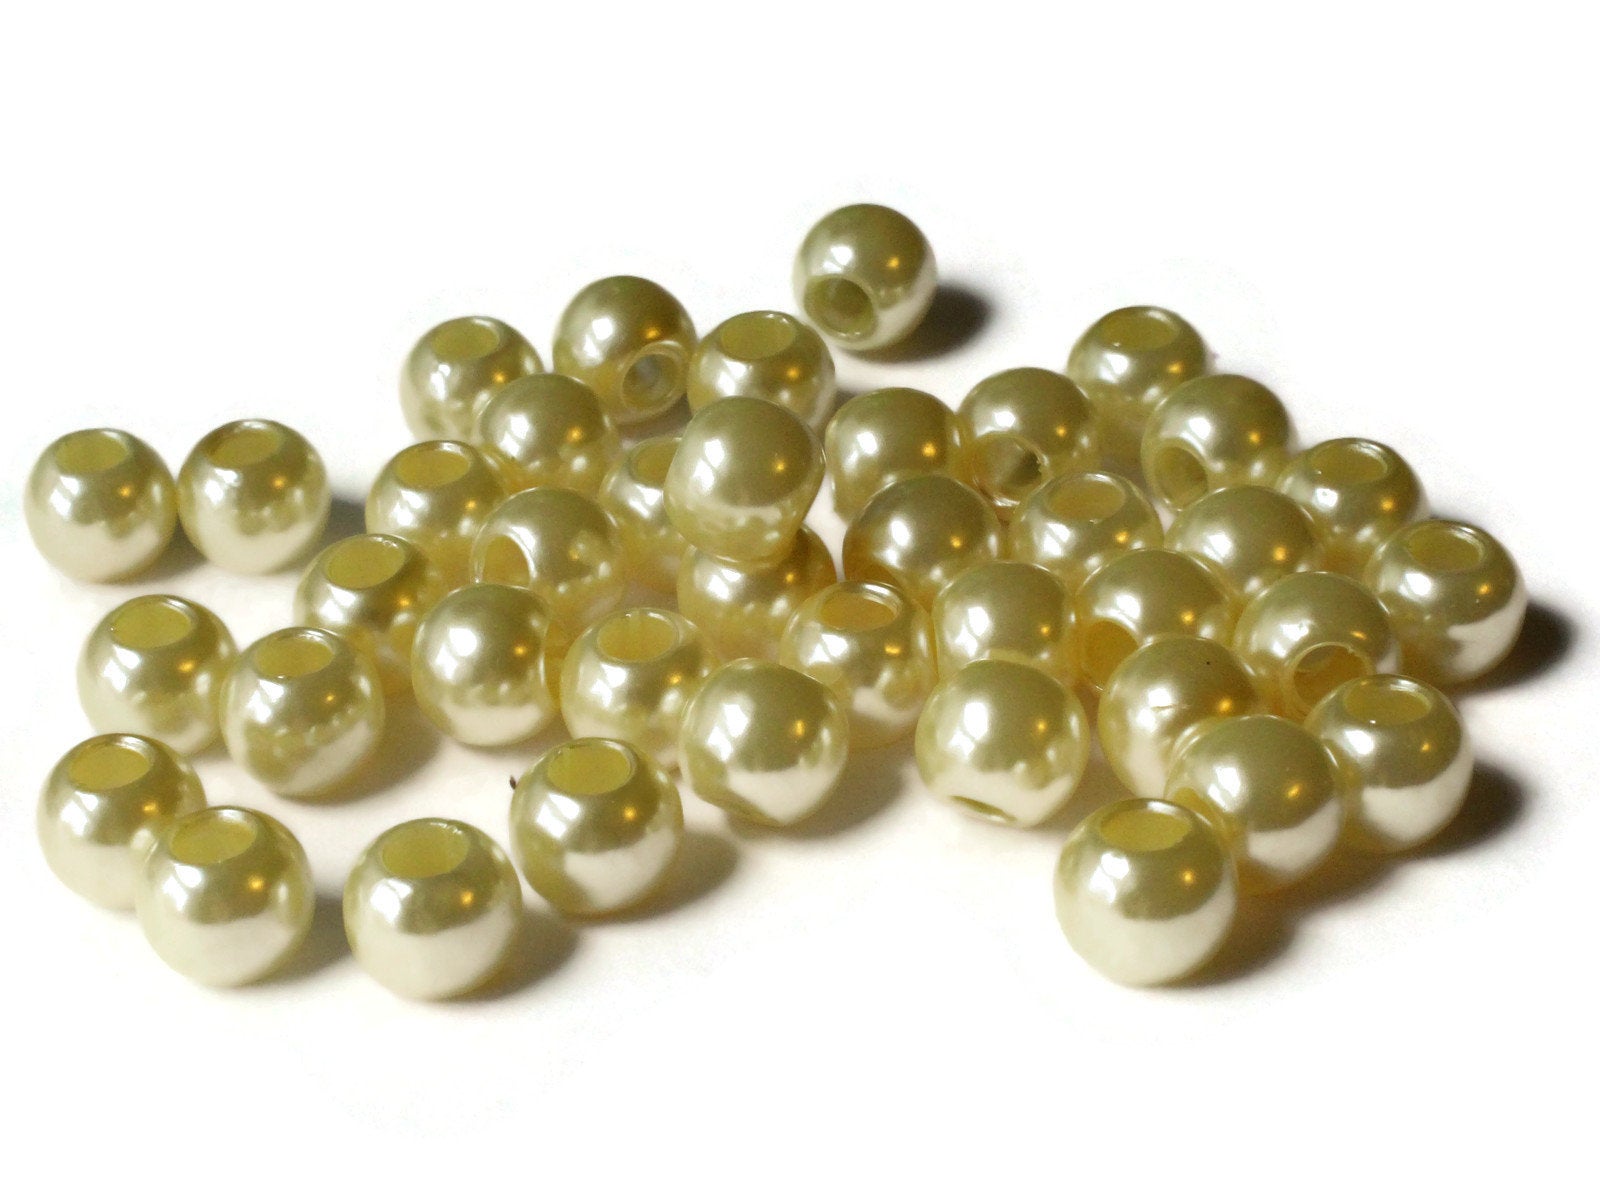 Cream Faux Pearls - 12 mm Fake Pearls